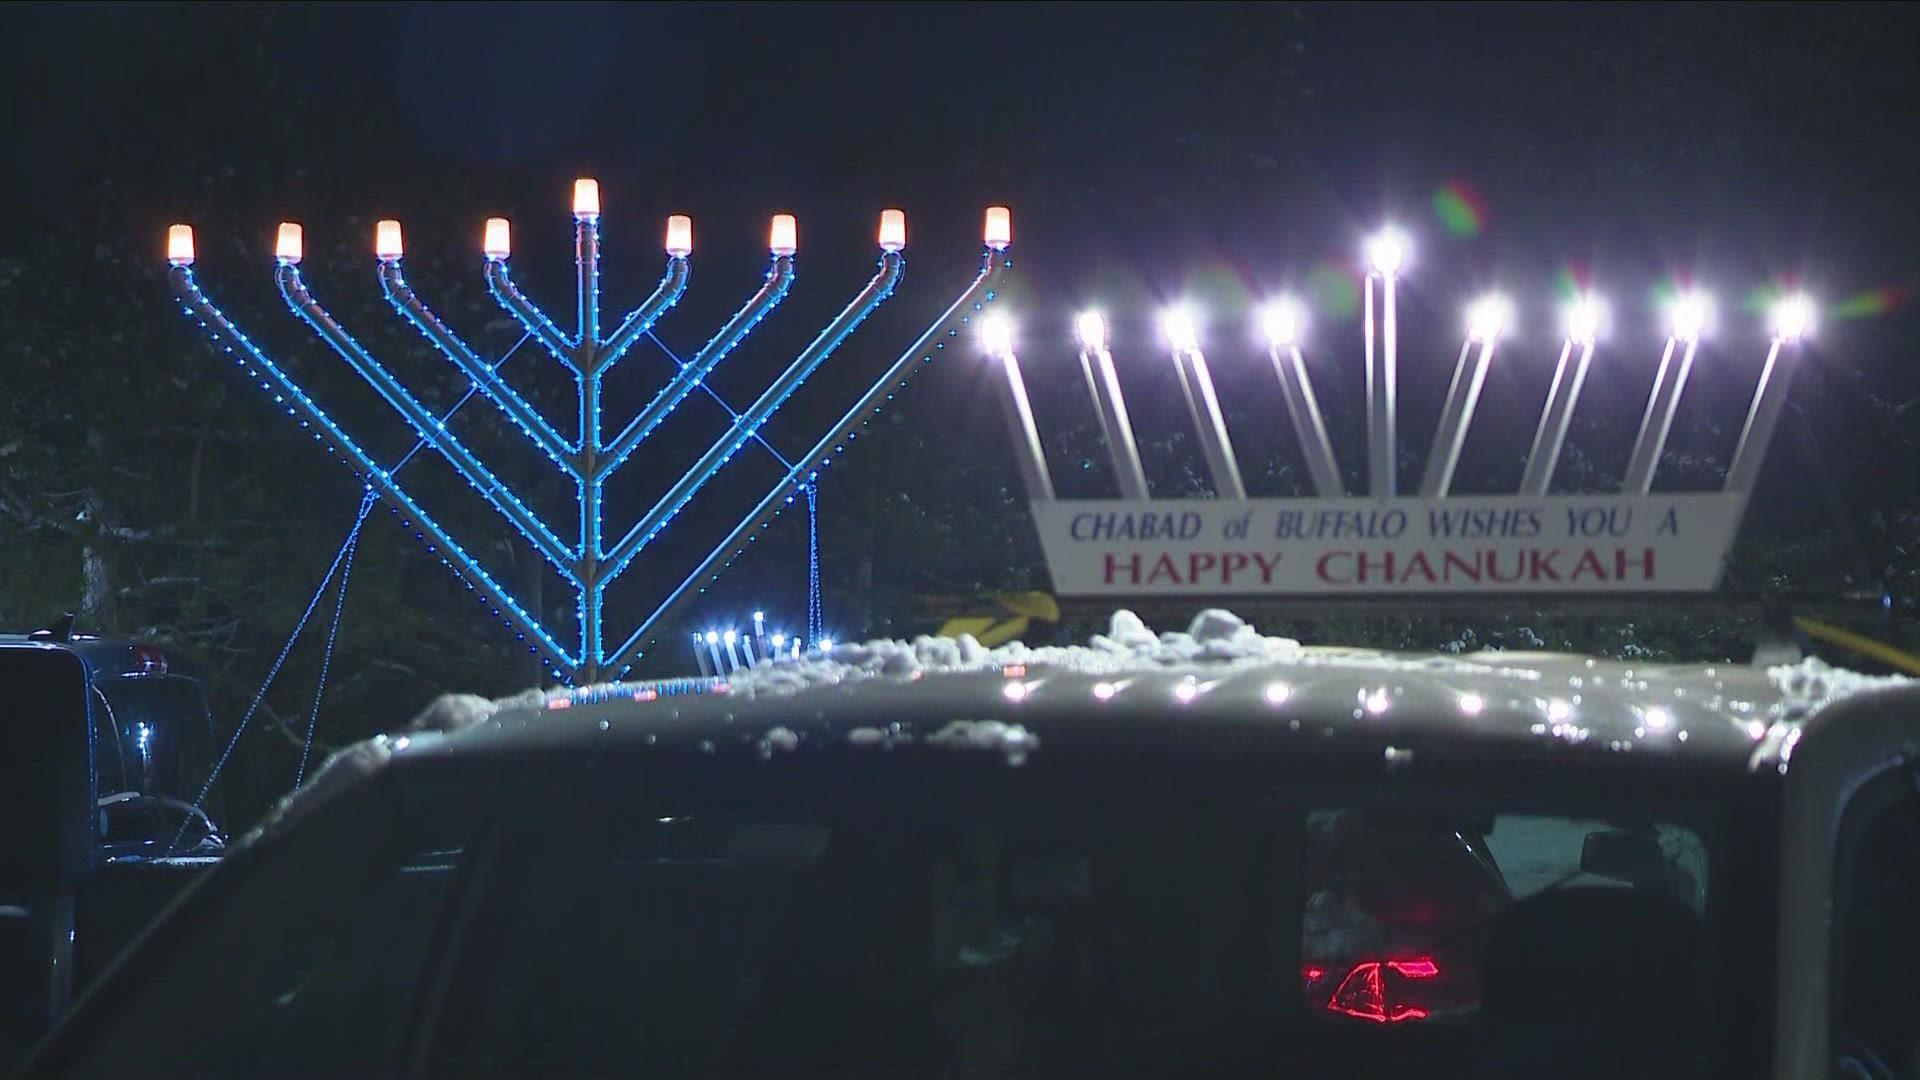 The first day of Hanukkah began at sundown on Sunday. The eight day festival of lights continues each night until December 26.